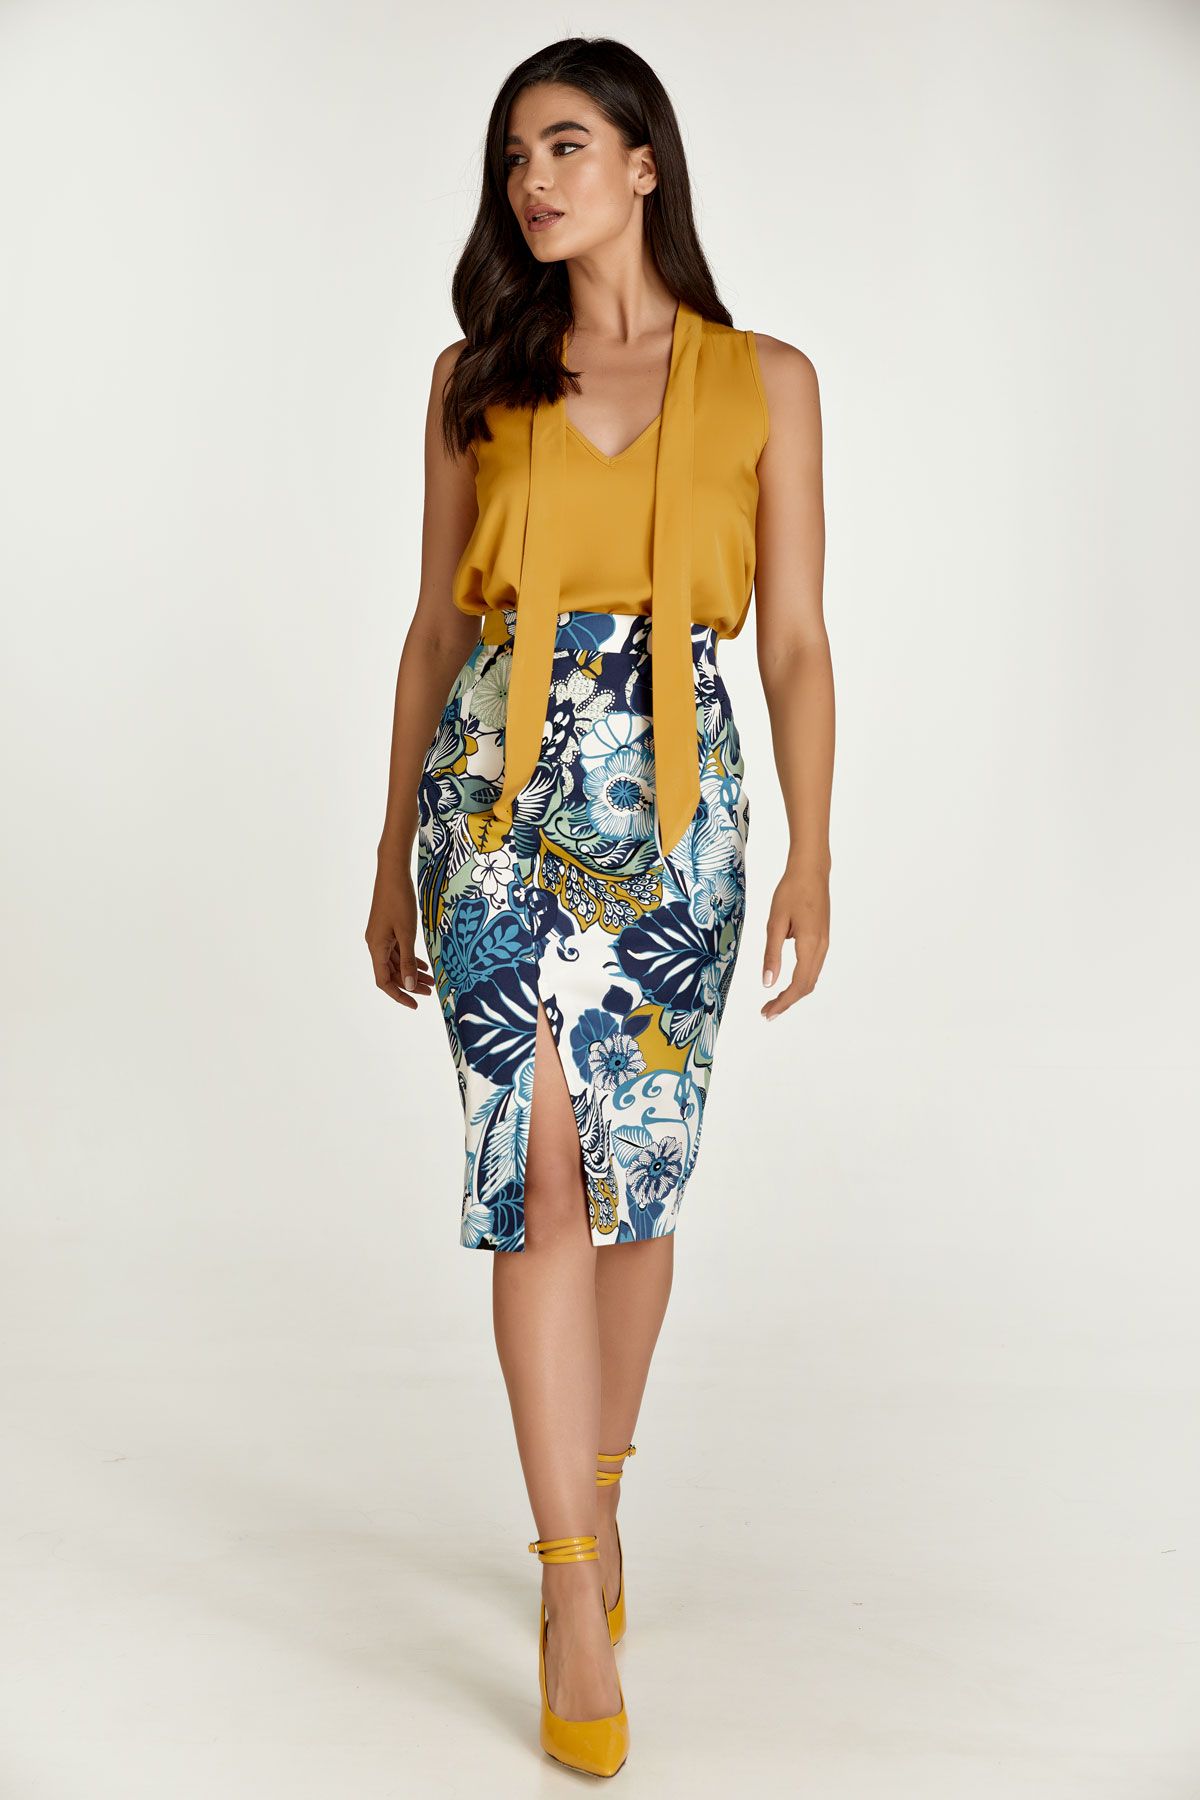 This pencil skirt is crafted in floral stretch gabardine fabric in blue and green shades. It has a 4cm wide waistband in the same fabric with darts below in the back. There is an off-centre slit in the front. It fastens in the back with a concealed zip. This pencil skirt is knee length and has an ecru lining. Heels and an off-shoulder top will take this skirt and you for a night on the town! This skirt is eco-friendly.